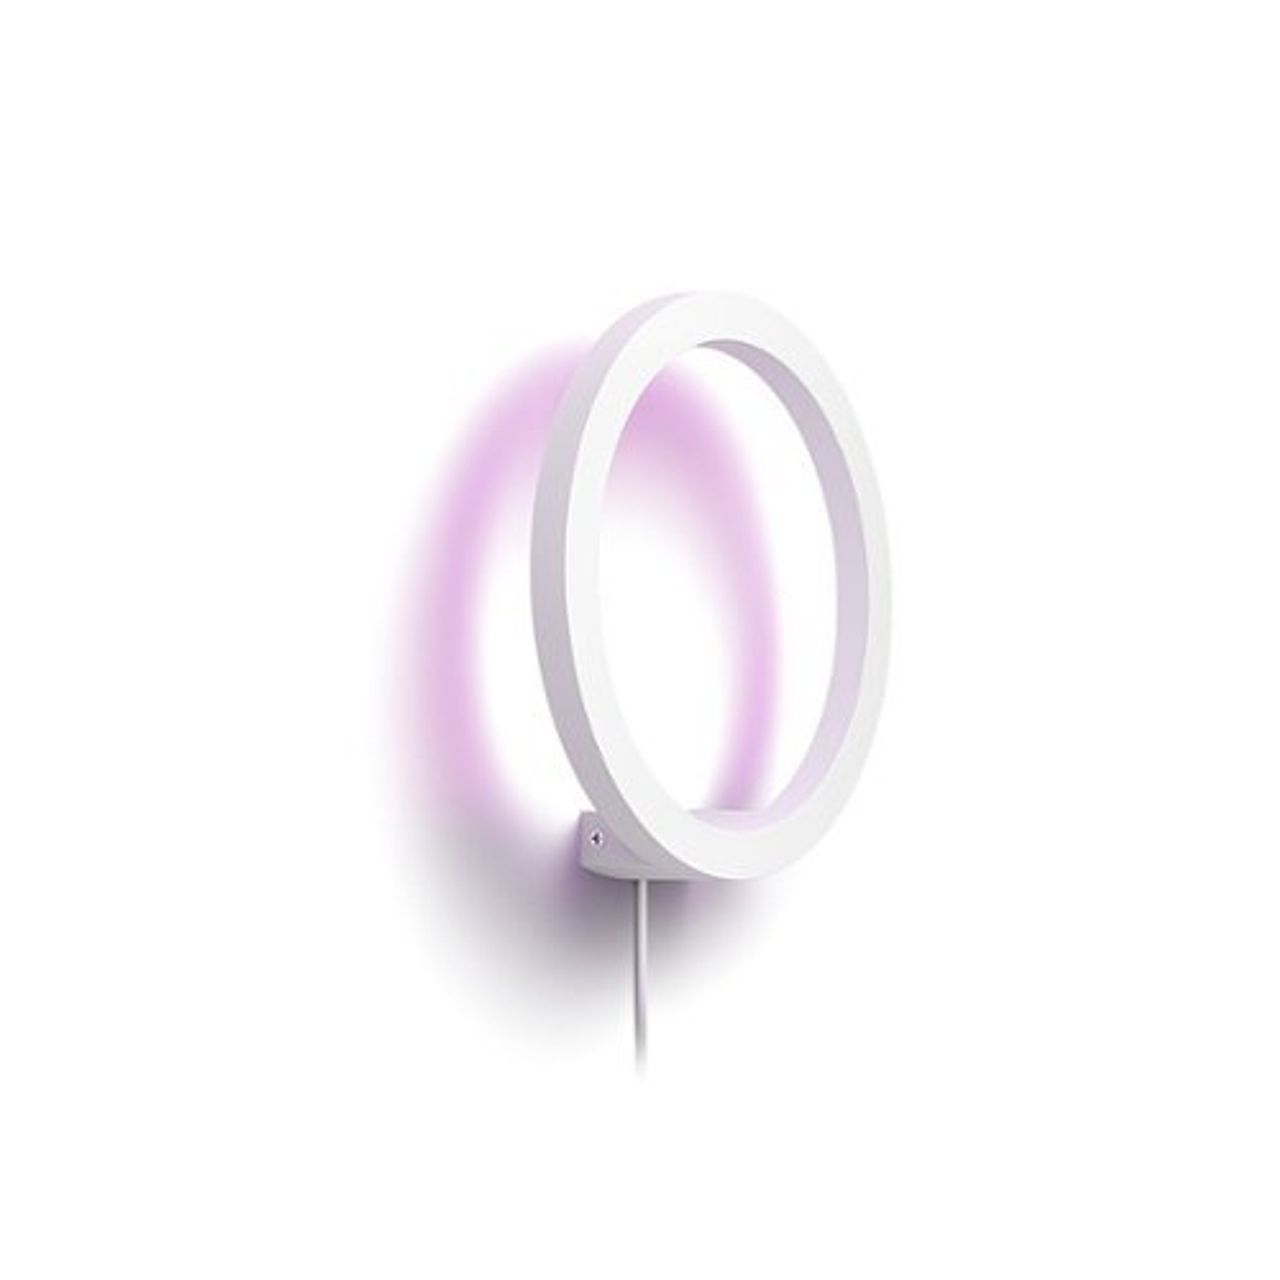 Philips - Sana and Color Ambiance Wall Light - White